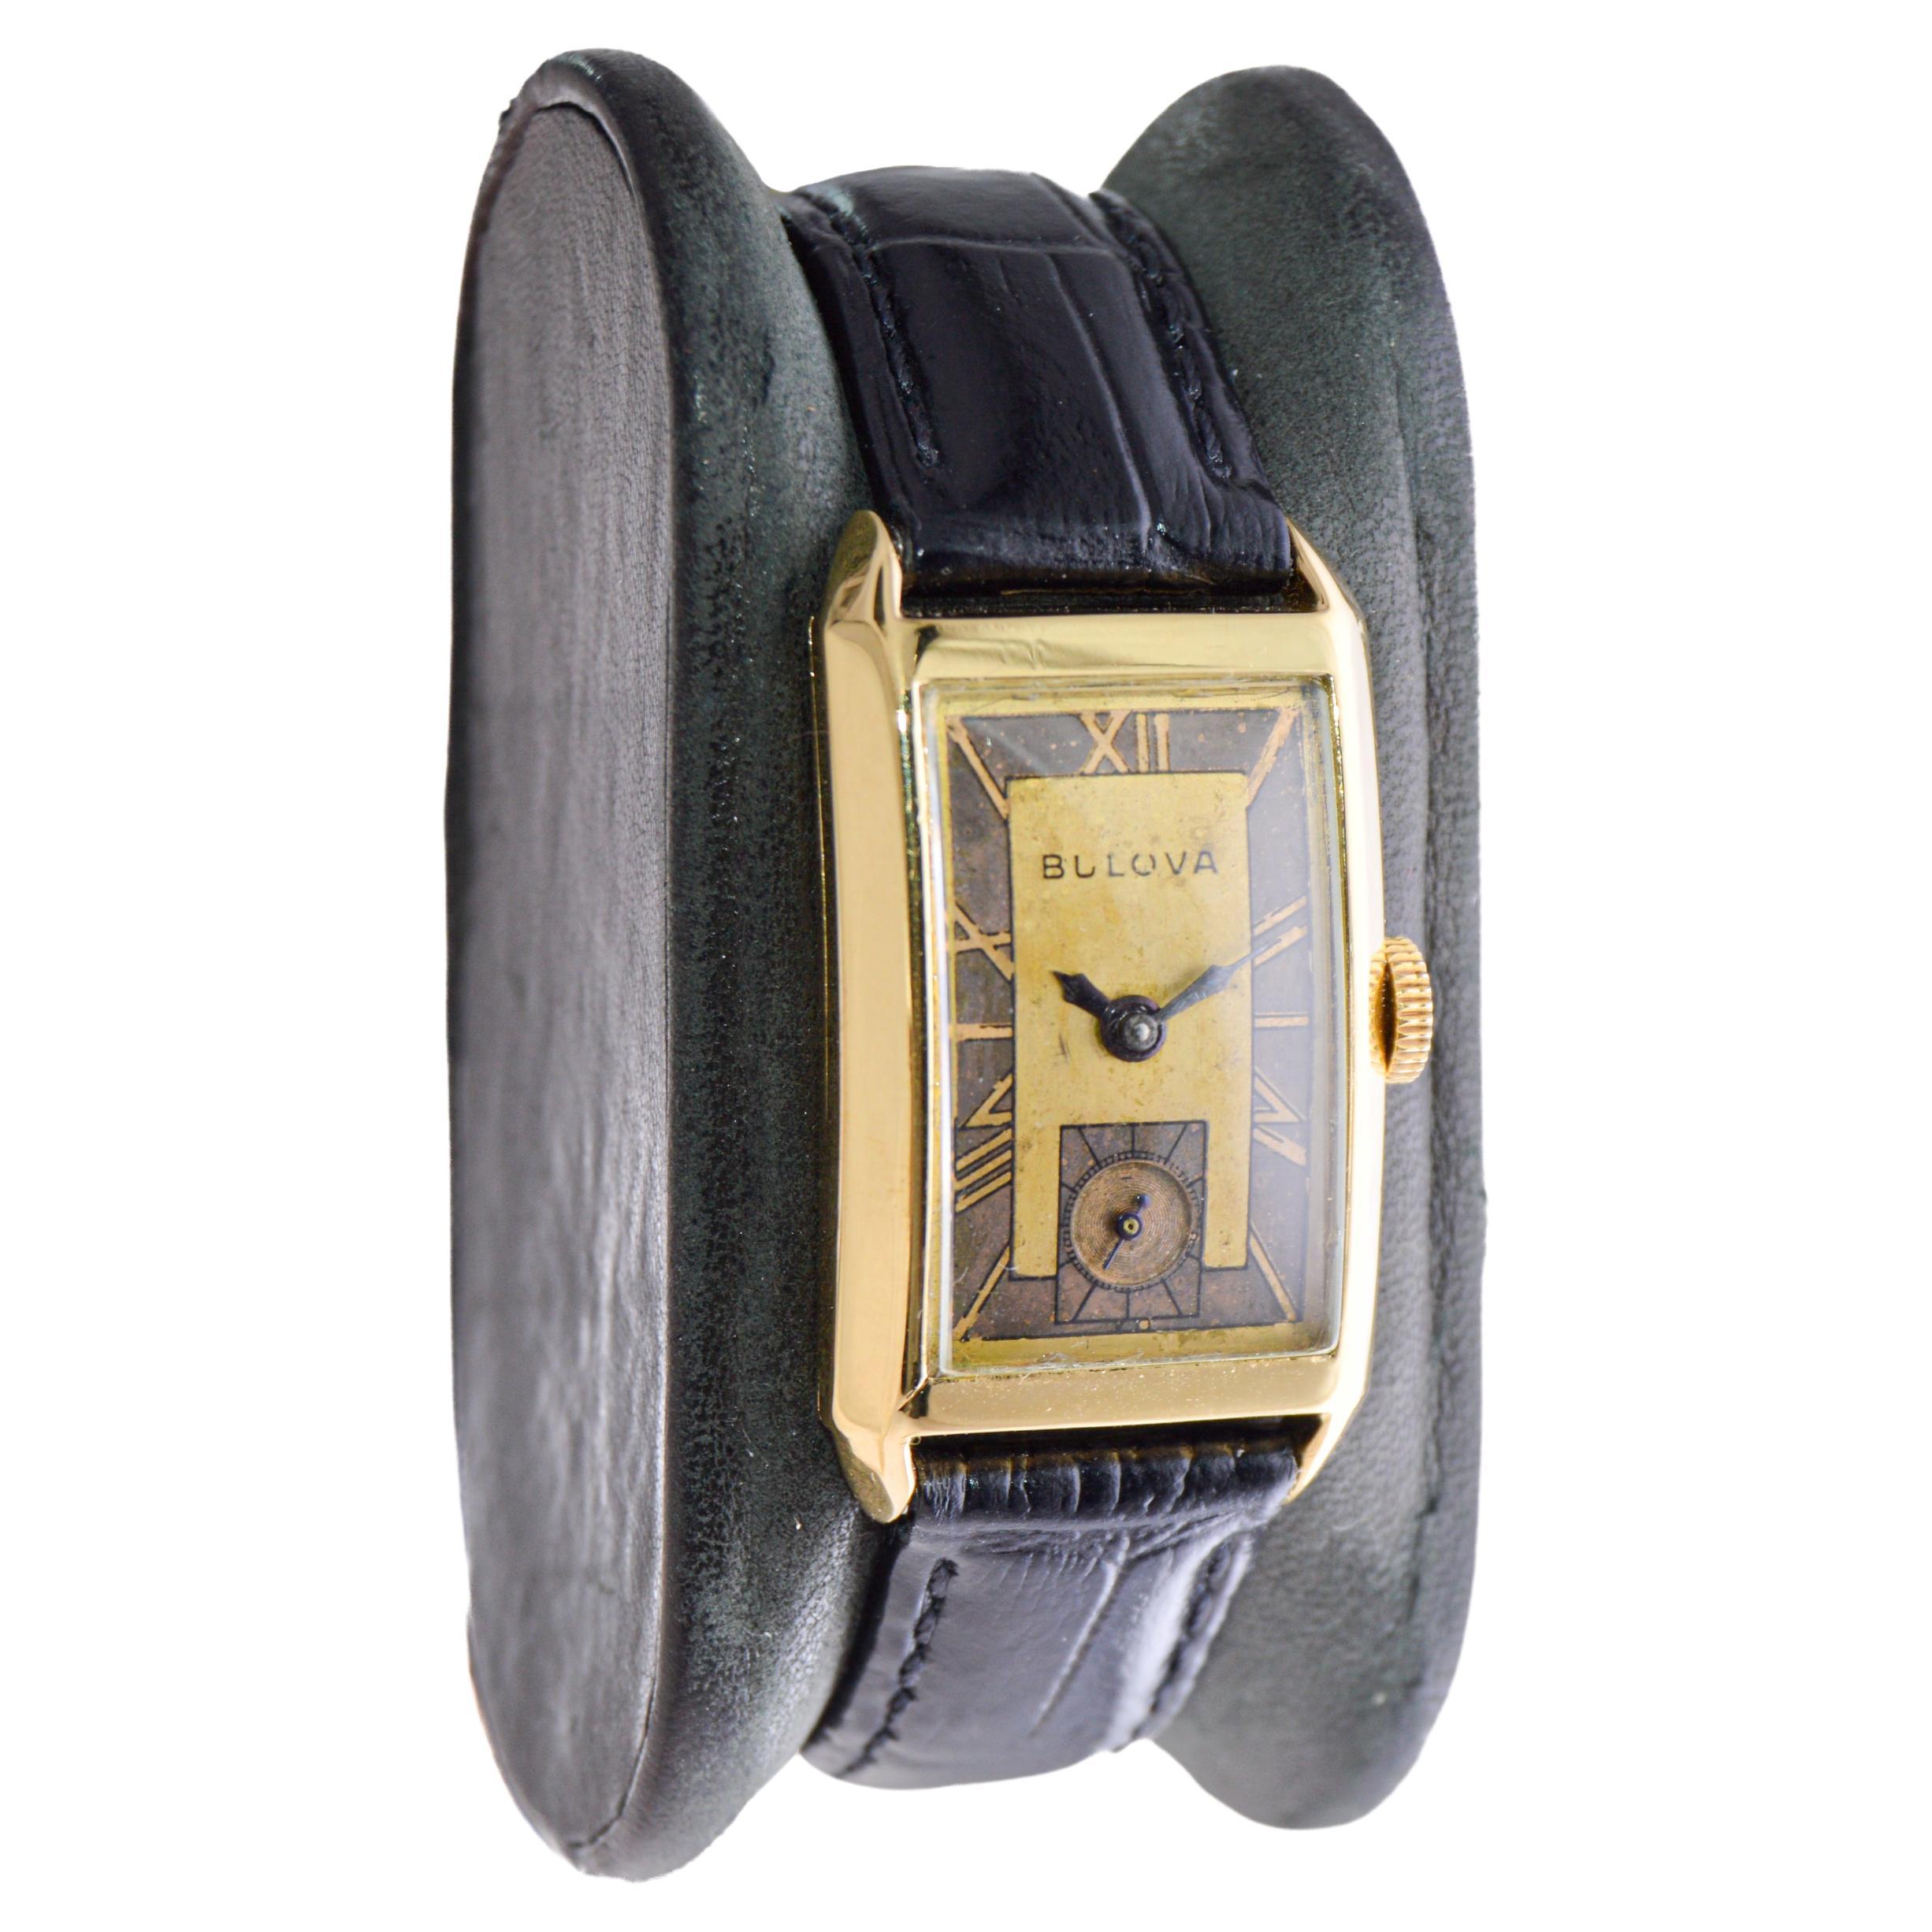 FACTORY / HOUSE: Bulova Watch Company
STYLE / REFERENCE: Art Deco / Curvex Style 
METAL / MATERIAL: Yellow Gold Filled
CIRCA / YEAR: 1940's
DIMENSIONS / SIZE: Length 36mm X Width 20mm
MOVEMENT / CALIBER: Manual Winding / 21 Jewels / Caliber 7AP
DIAL